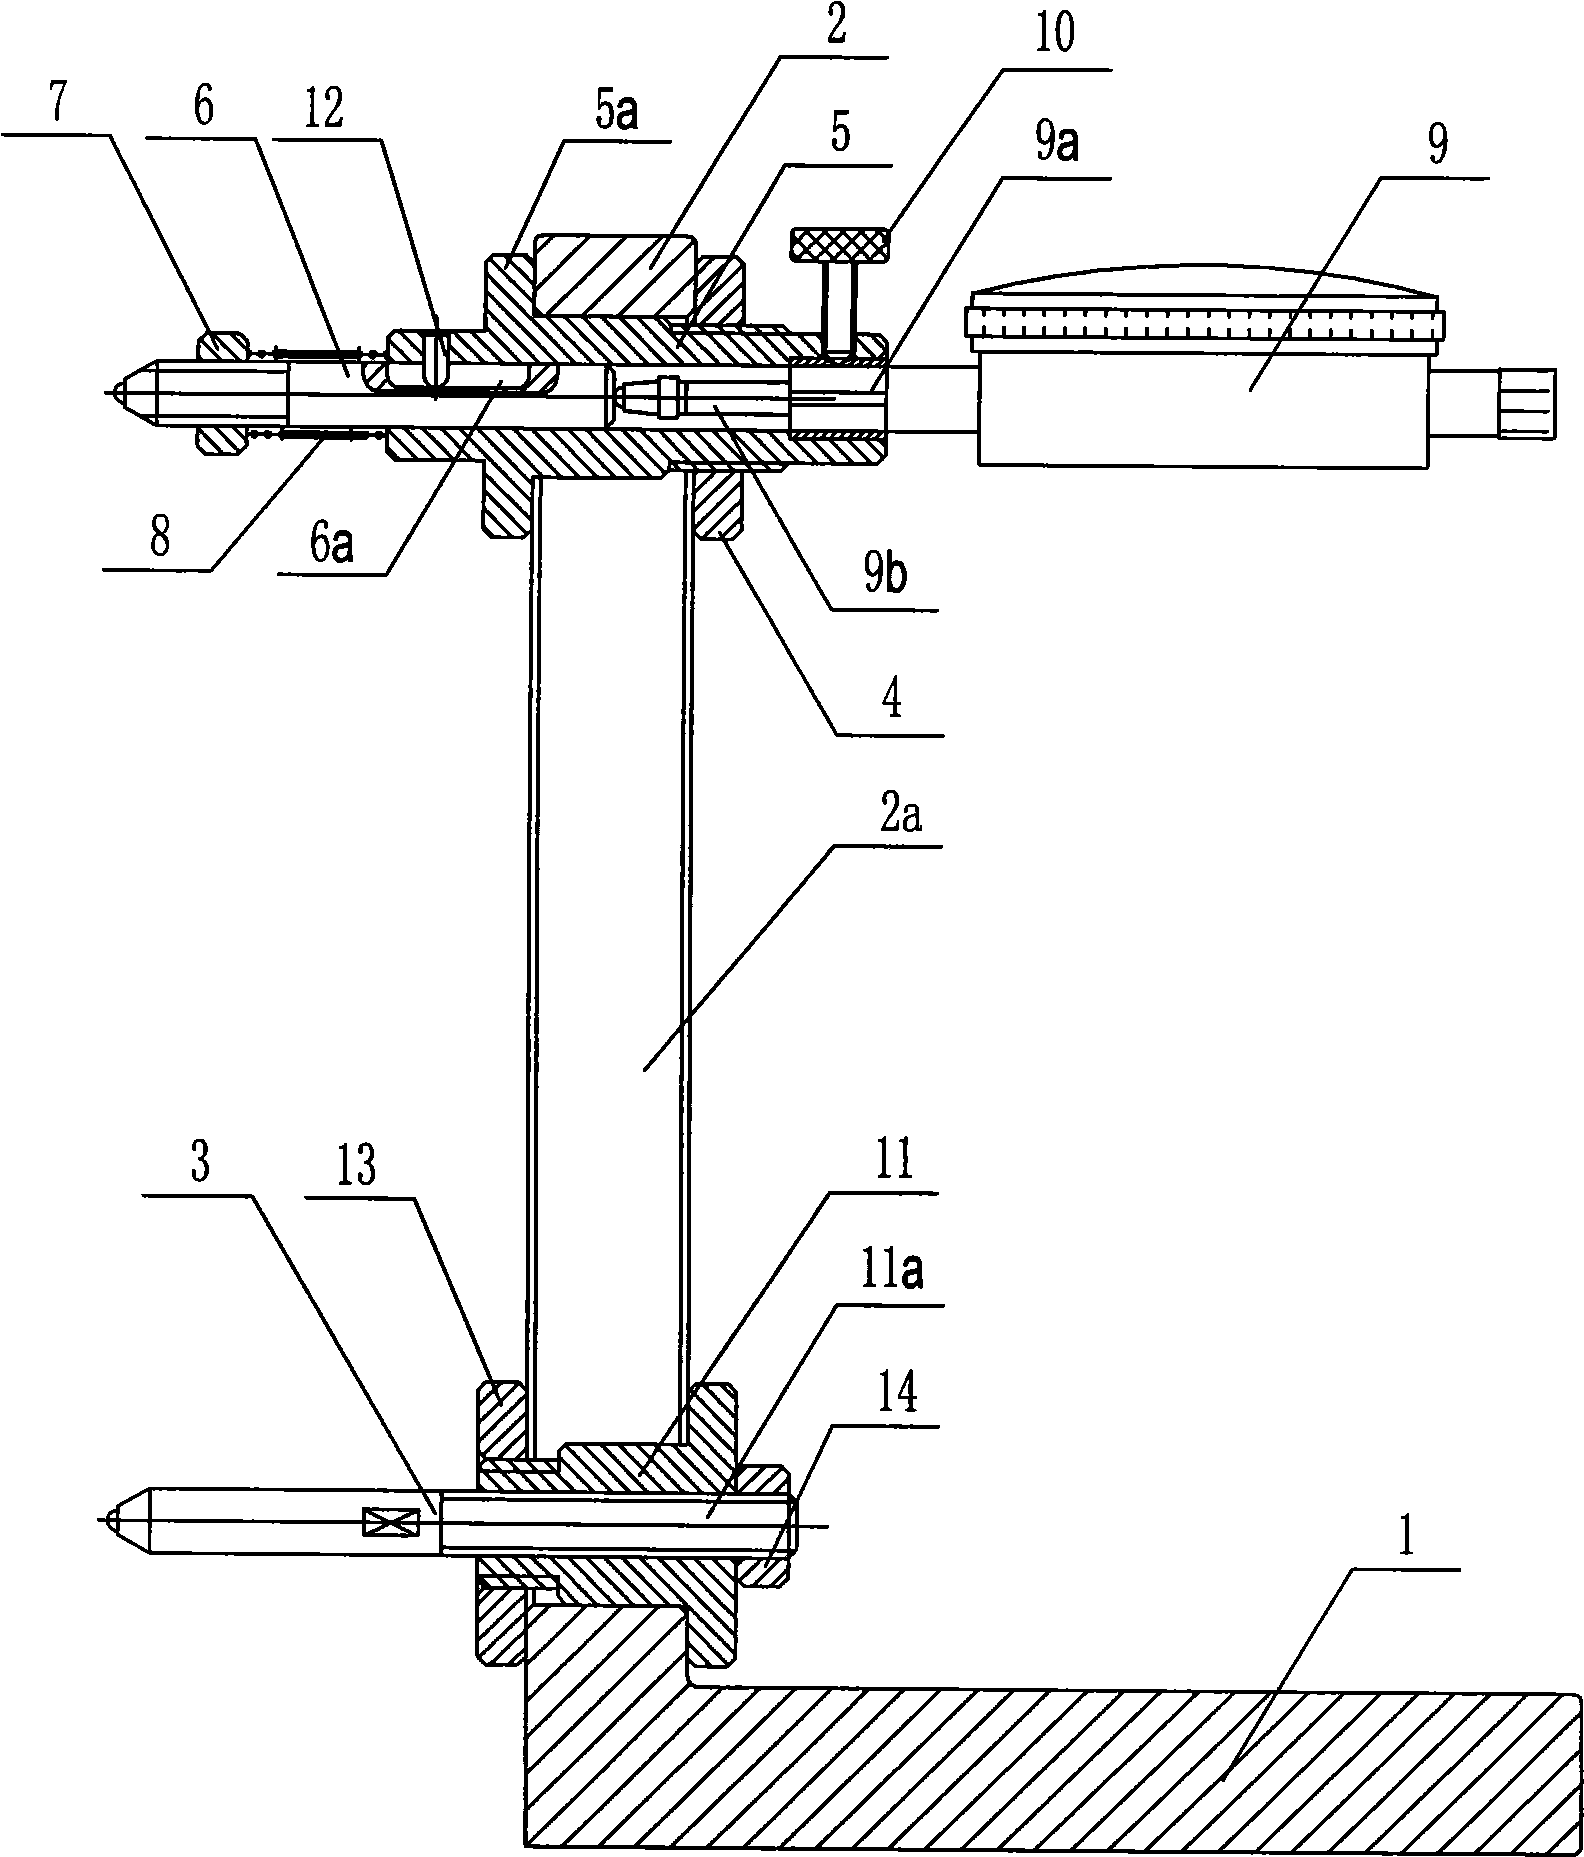 Device and method for measuring verticality